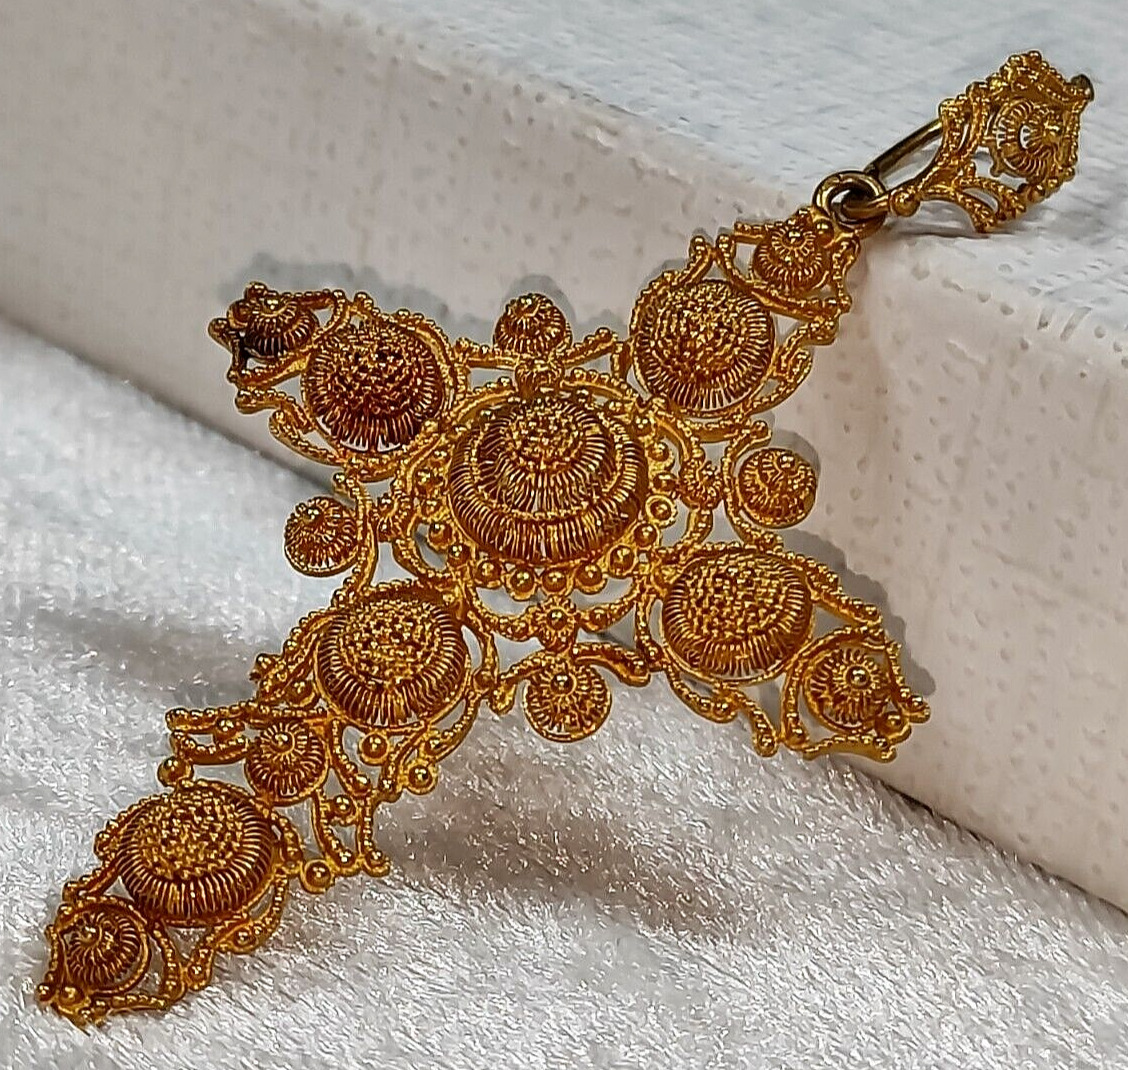 ONE OF A KIND HANDMADE ANTIQUE CROSS Filigree SOLID GOLD 18K FROM 1820 